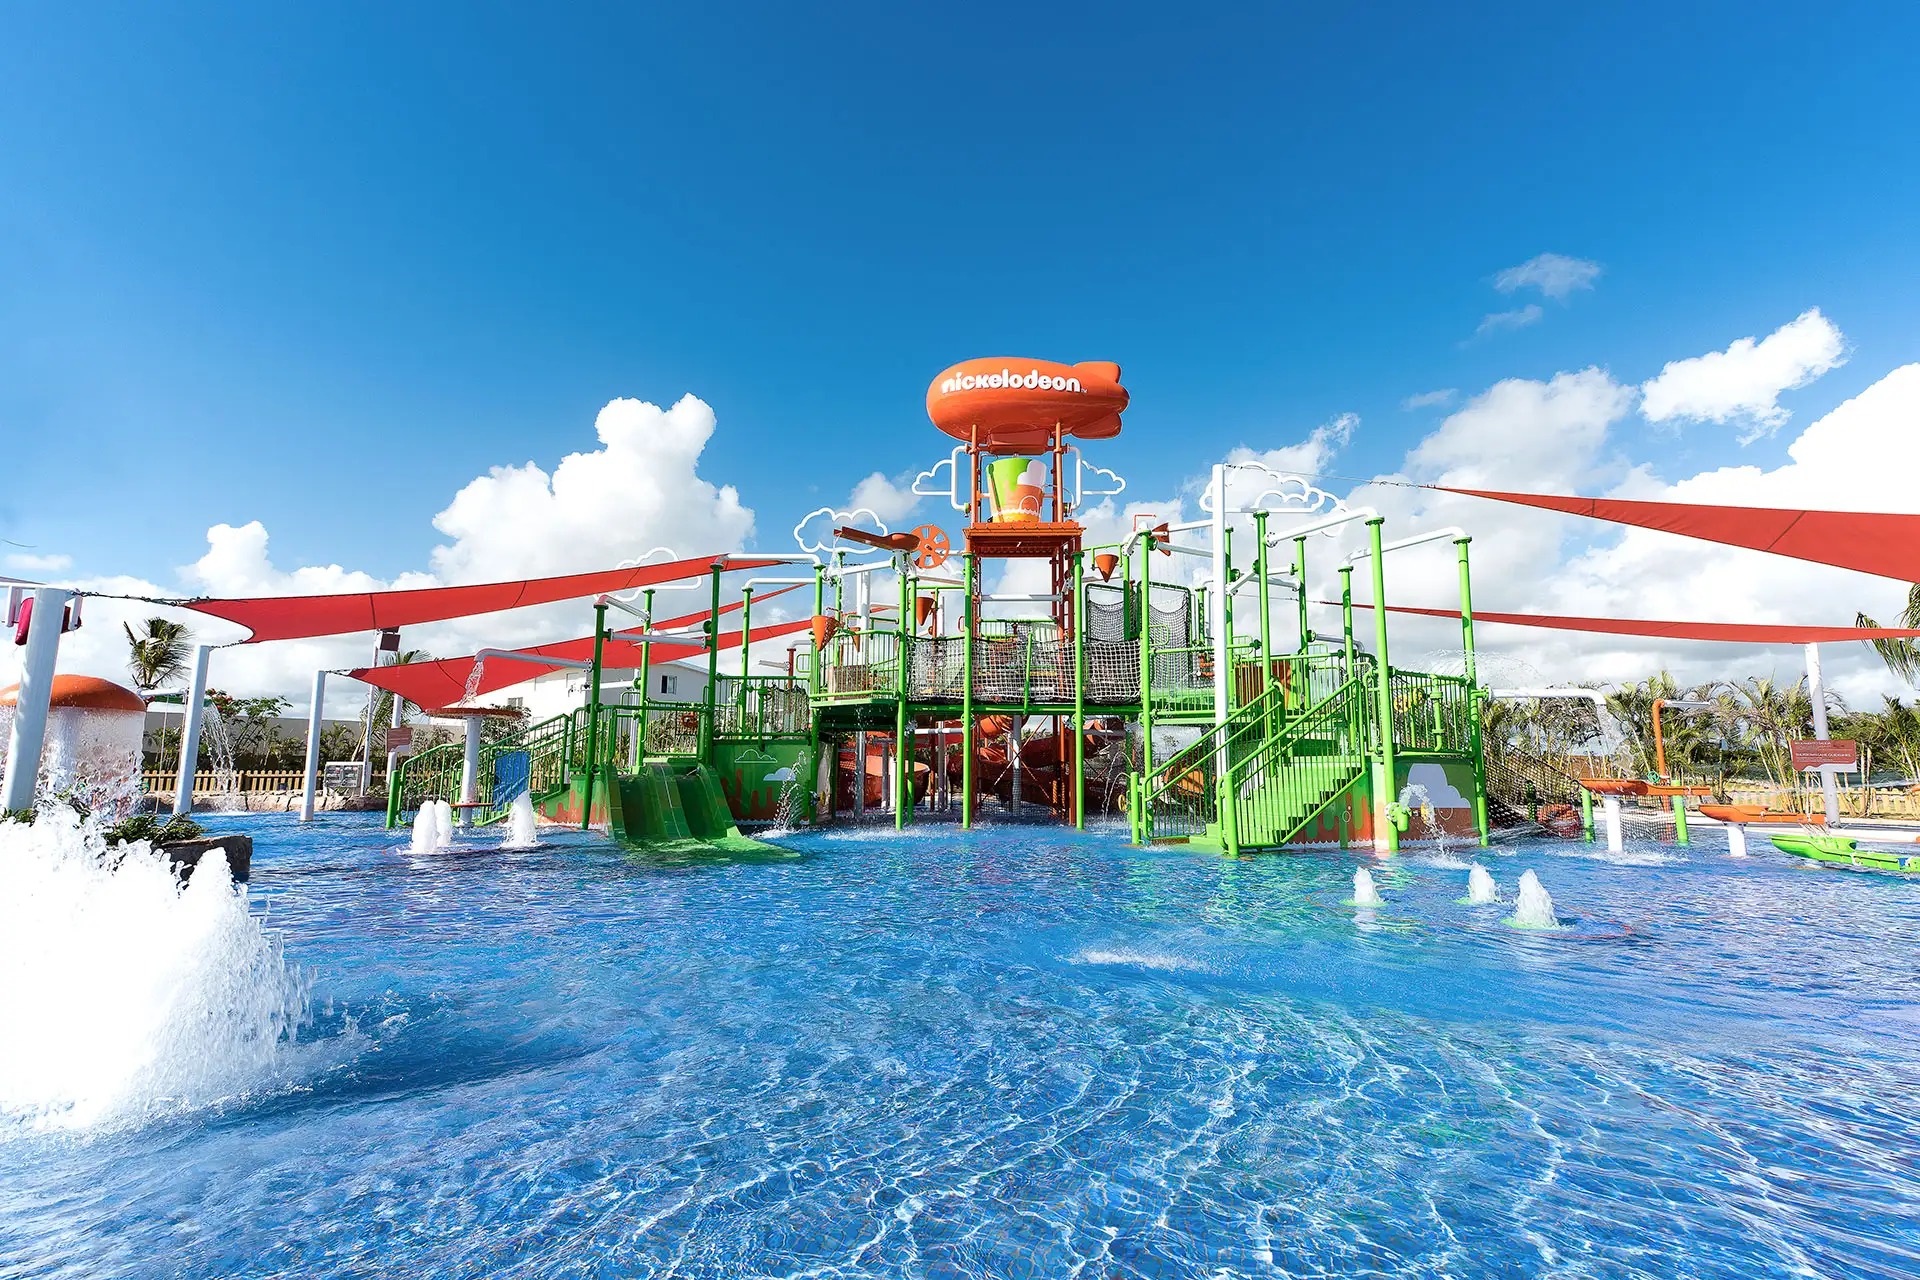 Nickelodeon Hotels & Resorts Punta Cana in the Dominican Republic